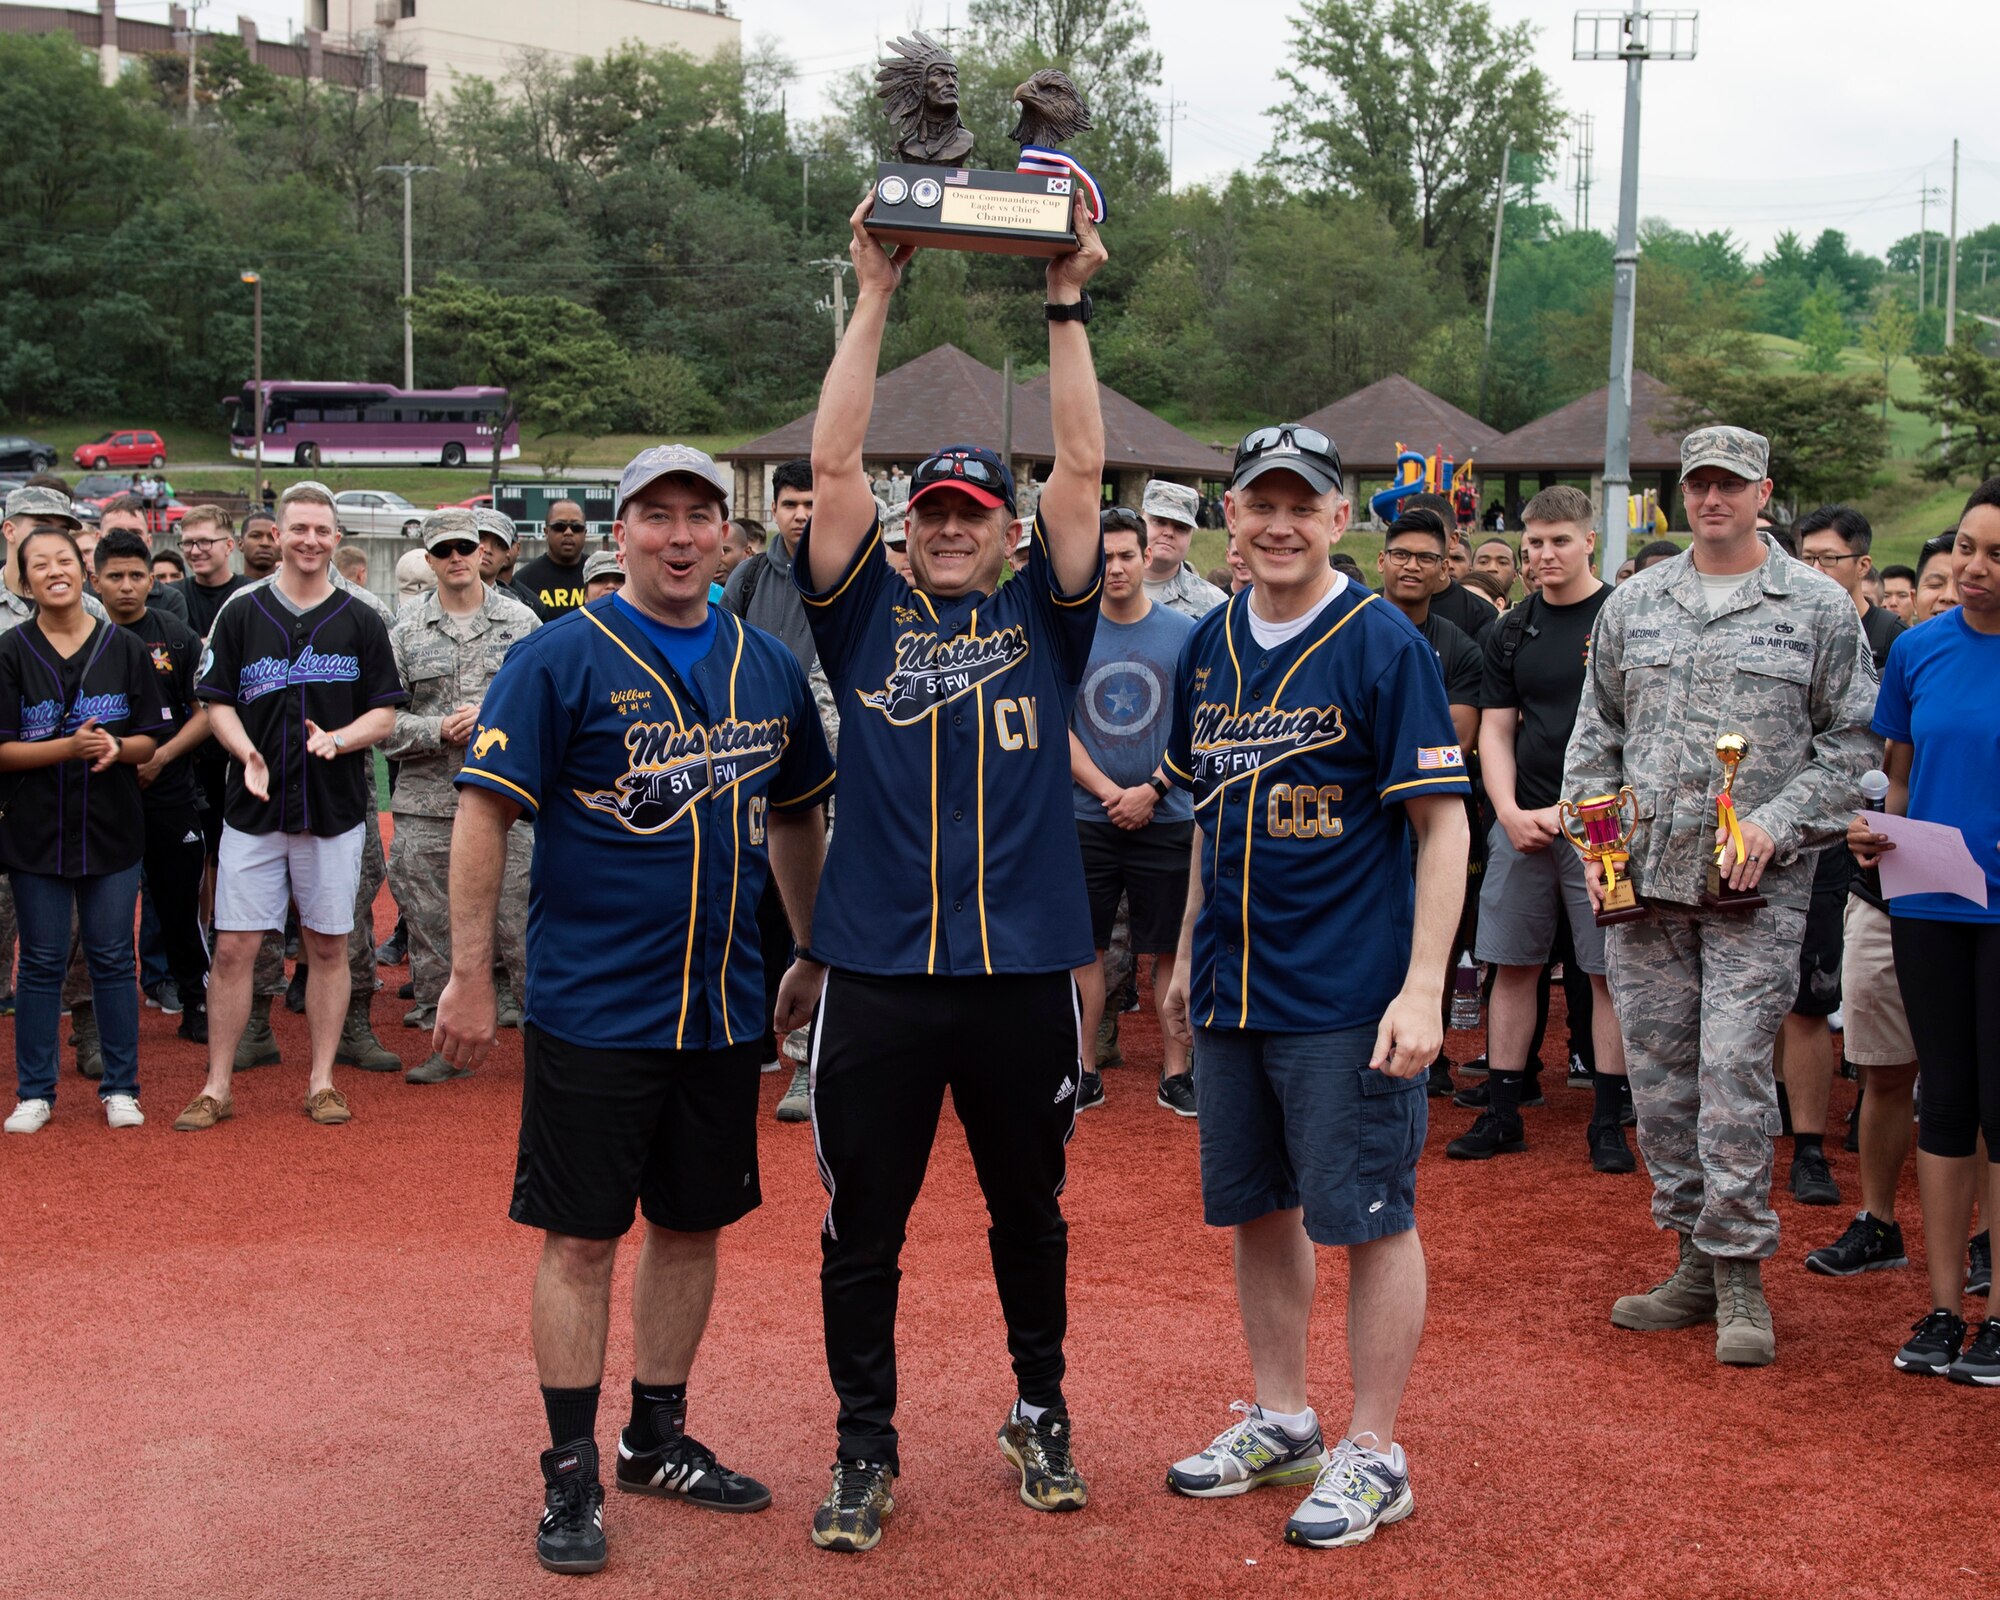 U.S. Air Force Col. Jesse Fiedel, 51st Fighter Wing vice commander, hoists the annual Osan Commander’s Cup softball championship trophy at Osan Air Base, Republic of Korea, Sept. 28, 2018 after the Eagle vs. Chiefs softball game. The colonels beat the chiefs by a score of 10-2. (U.S. Air Force photo by Staff Sgt. Sergio A. Gamboa)